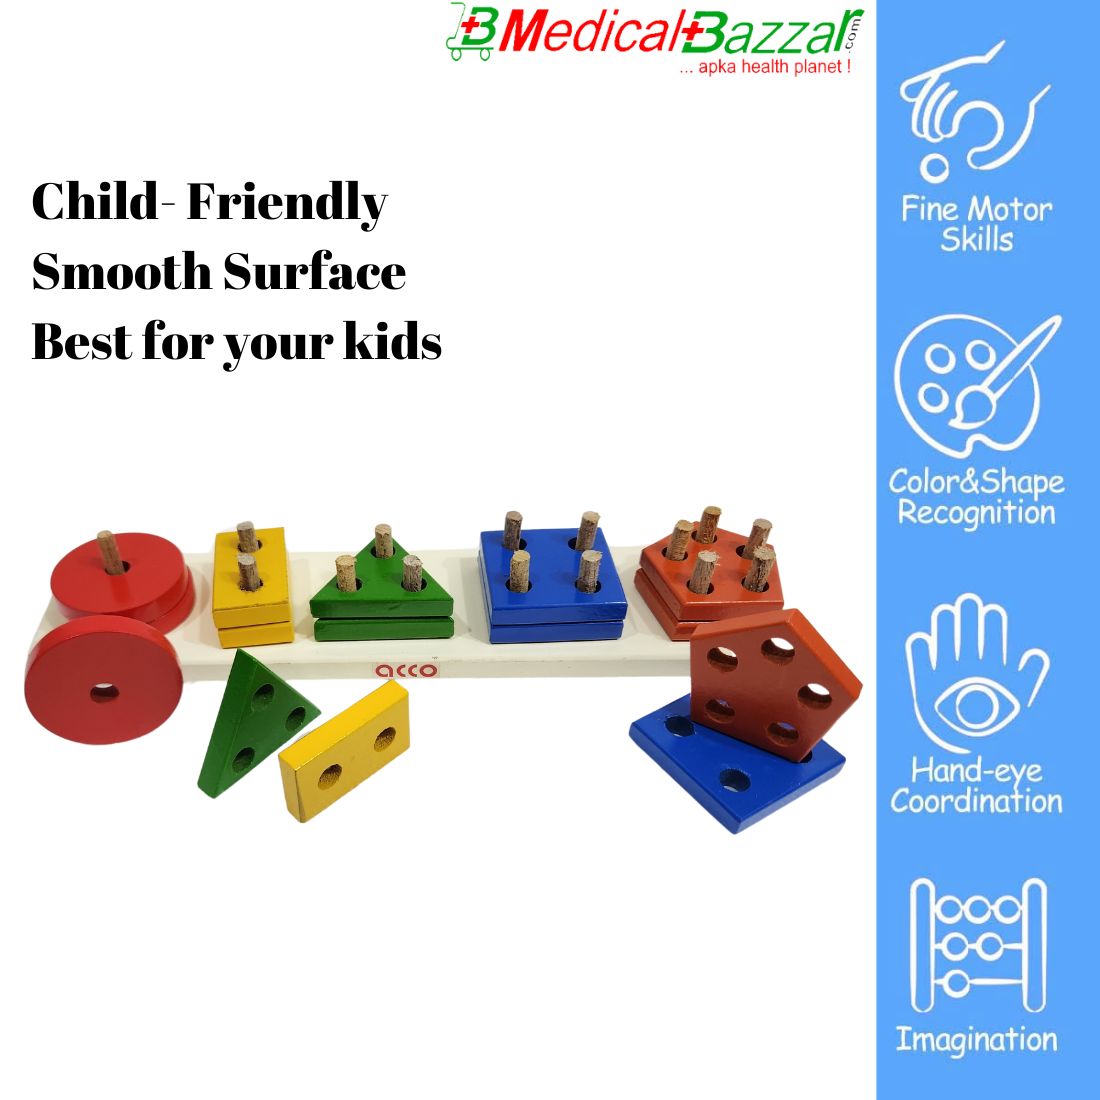 acco Wooden Shapes Geometric Board Blocks Sorting and Stacking